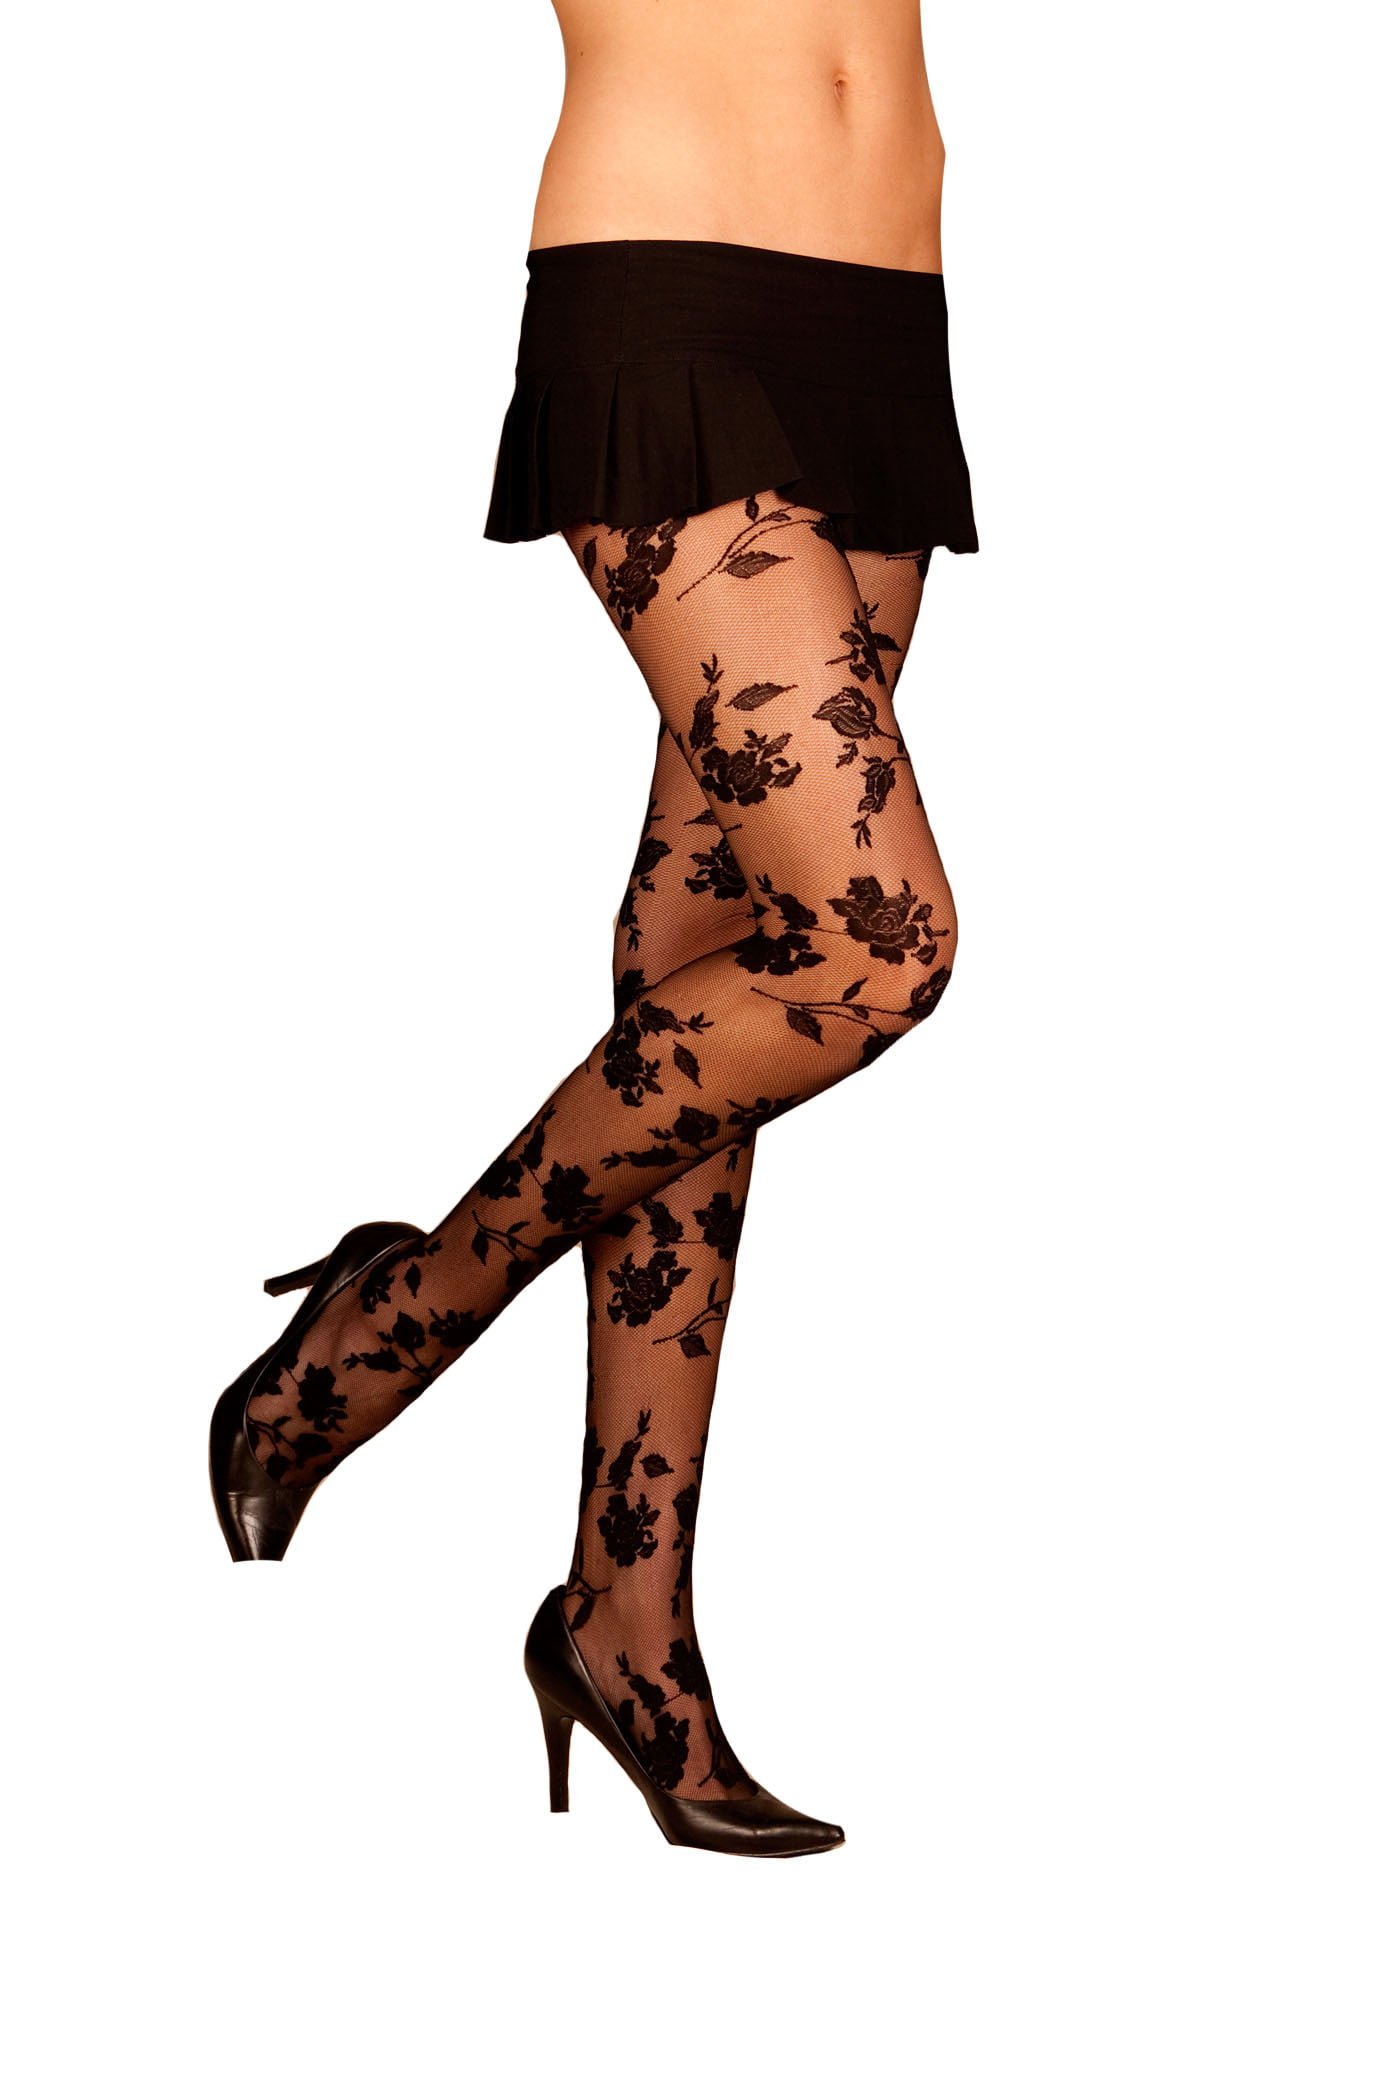 Sheer Tights With Designs 3419